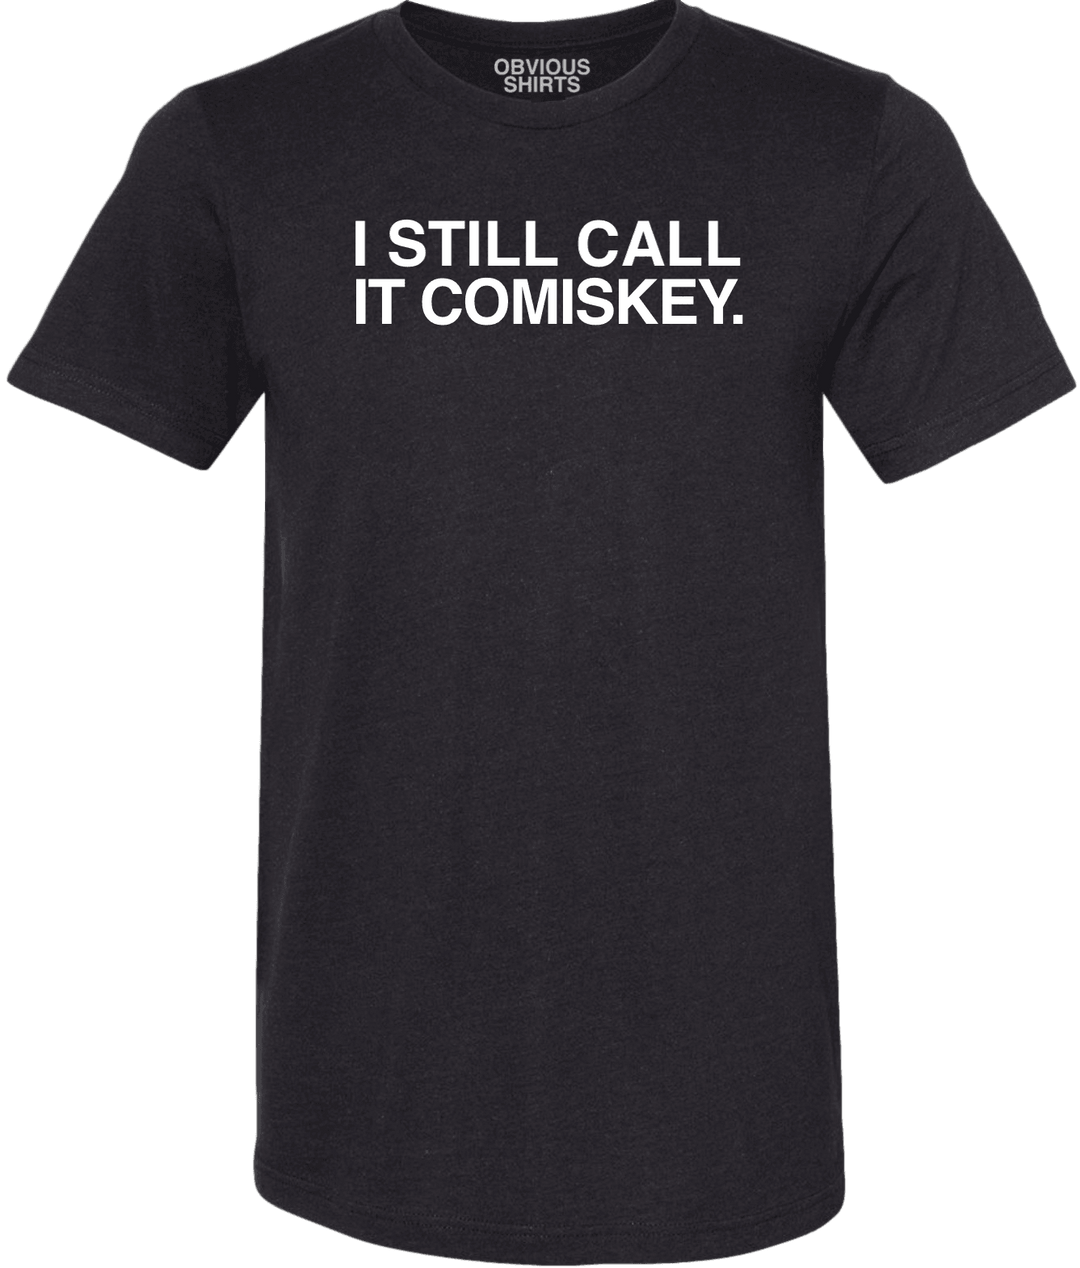 I STILL CALL IT COMISKEY. - OBVIOUS SHIRTS.